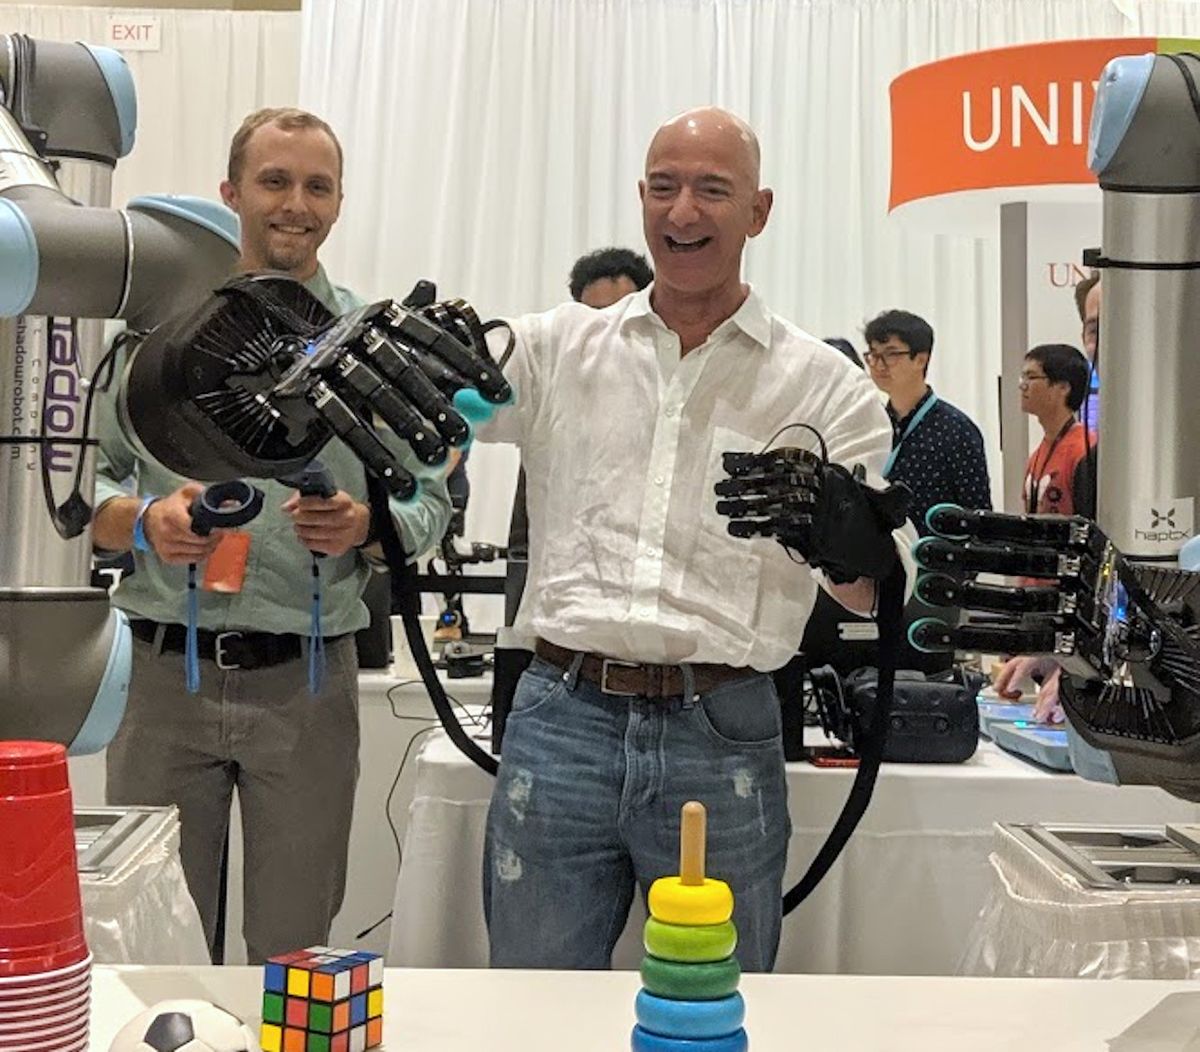 Amazon CEO Jeff Bezos tries dexterous robot hand at re:MARS conference